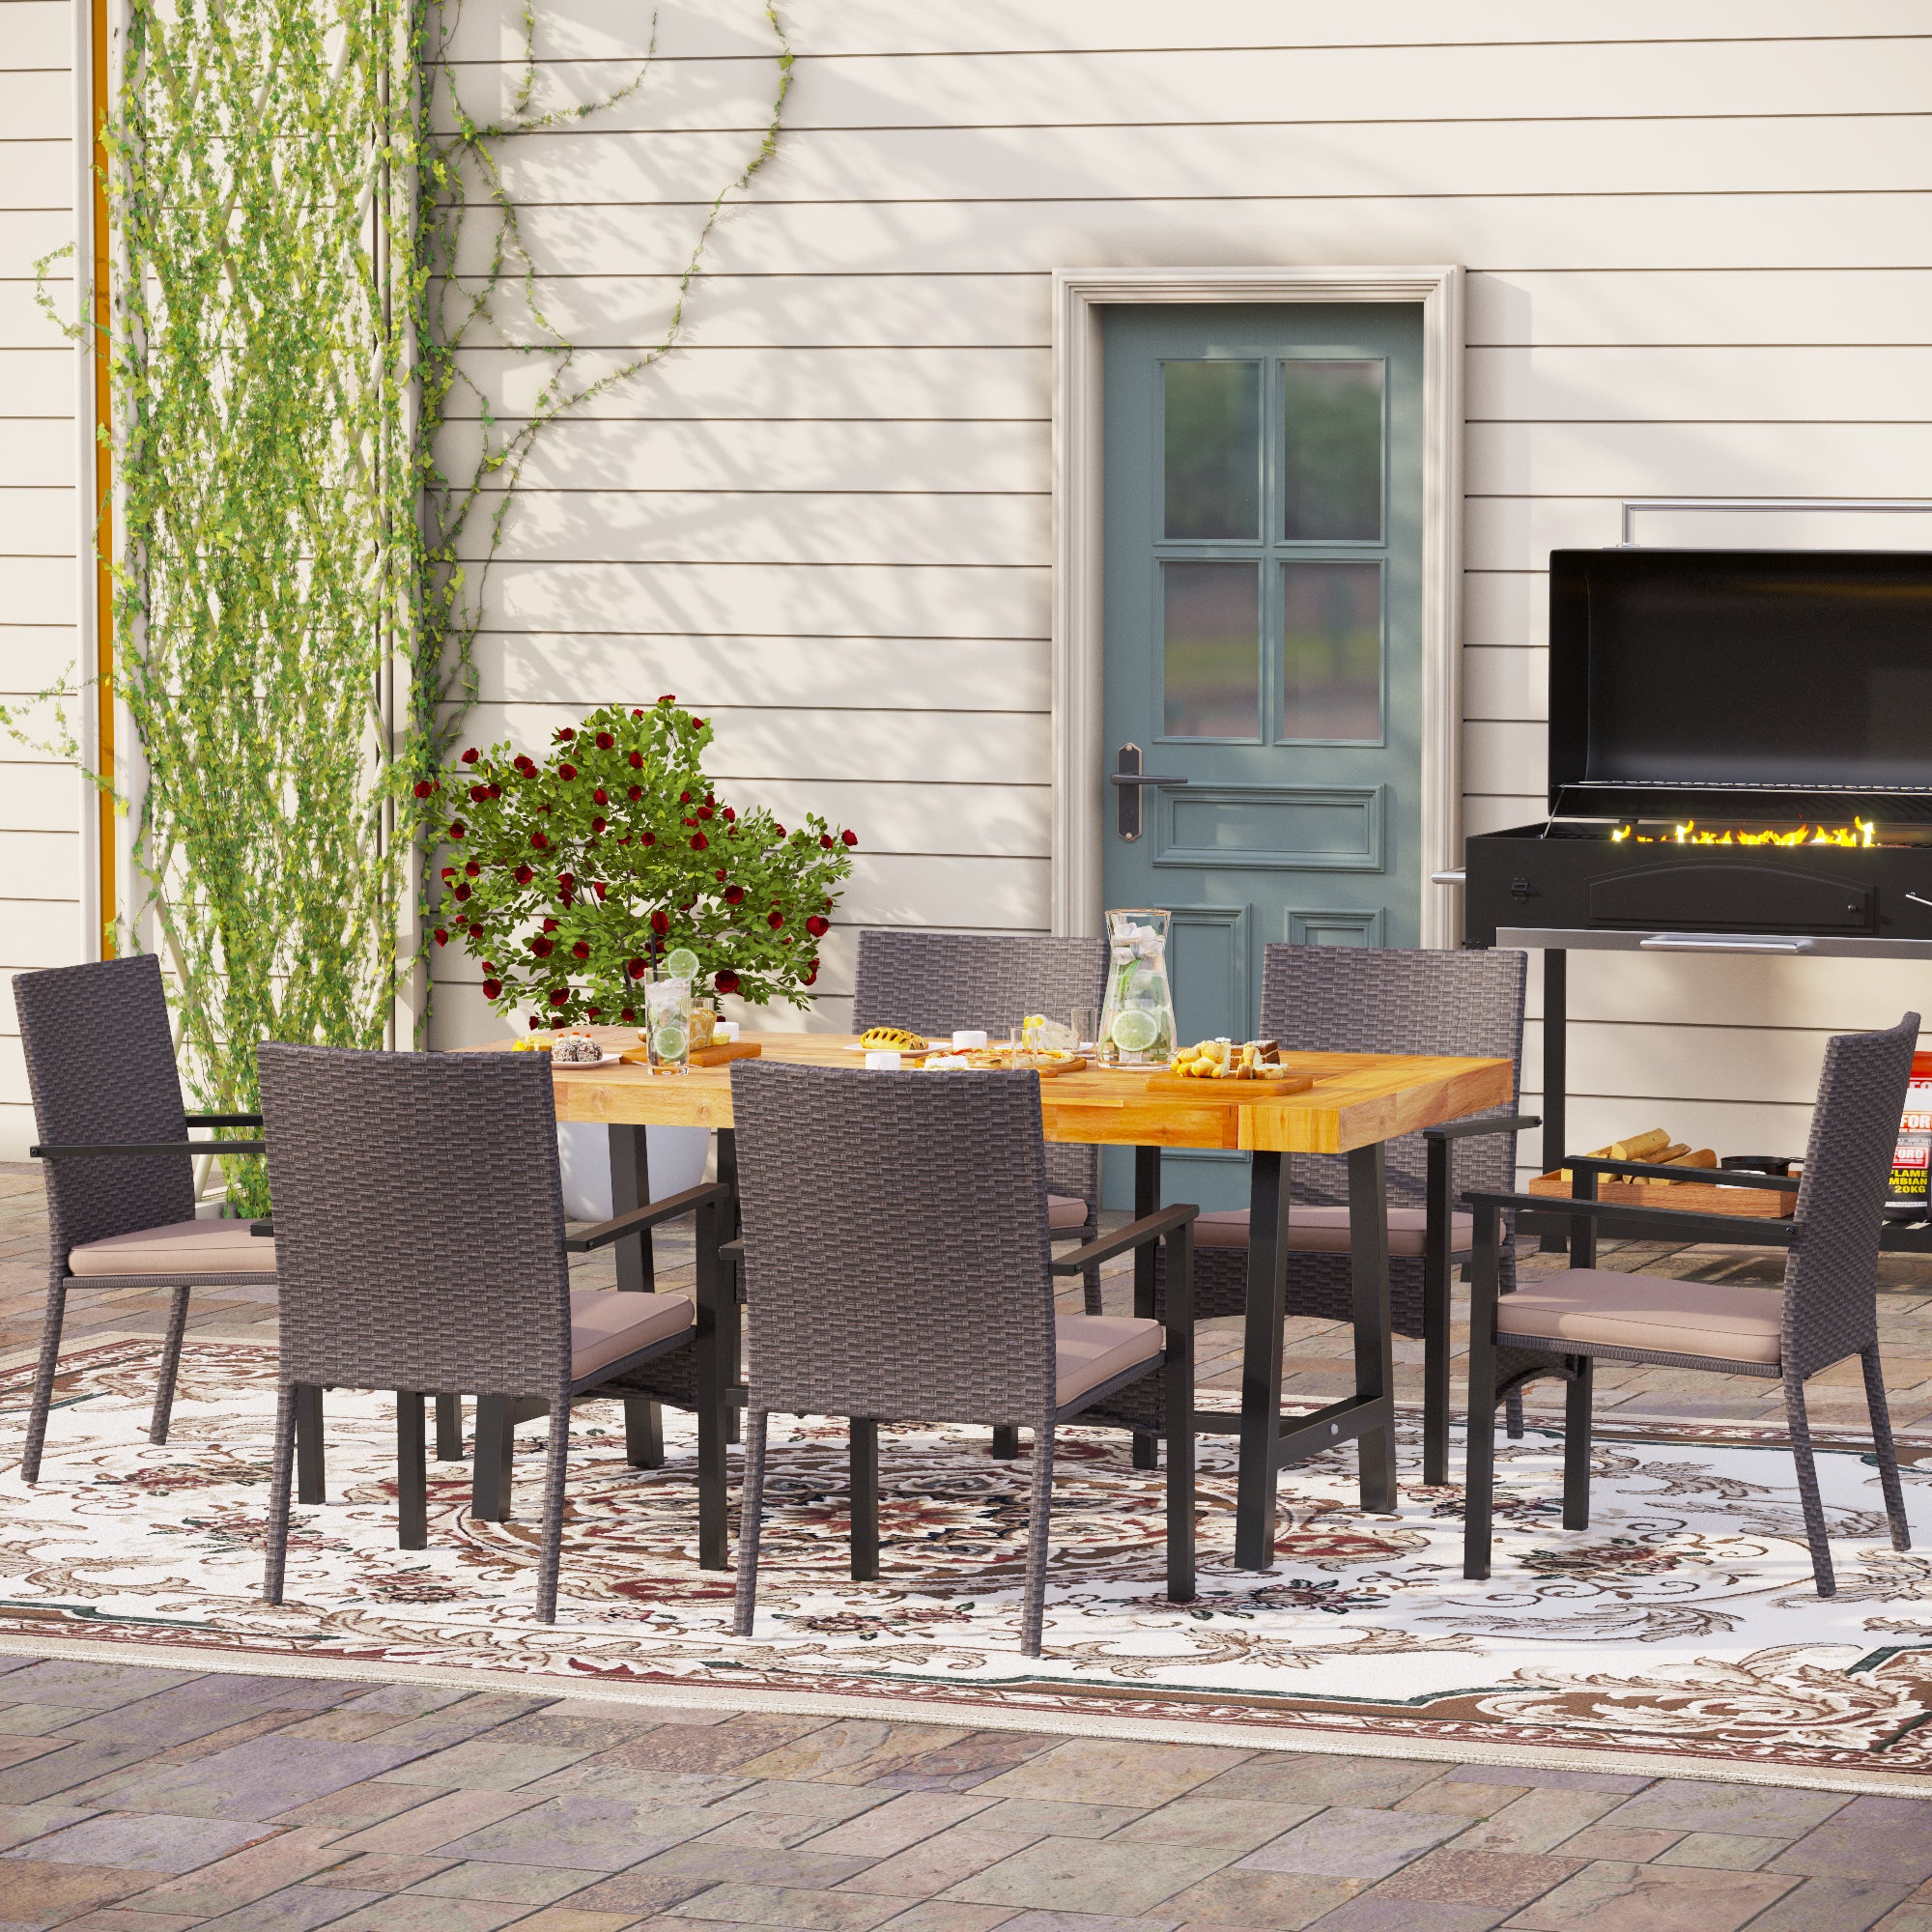 MFSTUDIO 7-Piece Acacia Wood Table & Rattan Cushion Dining Chairs Outdoor Patio Dining Set